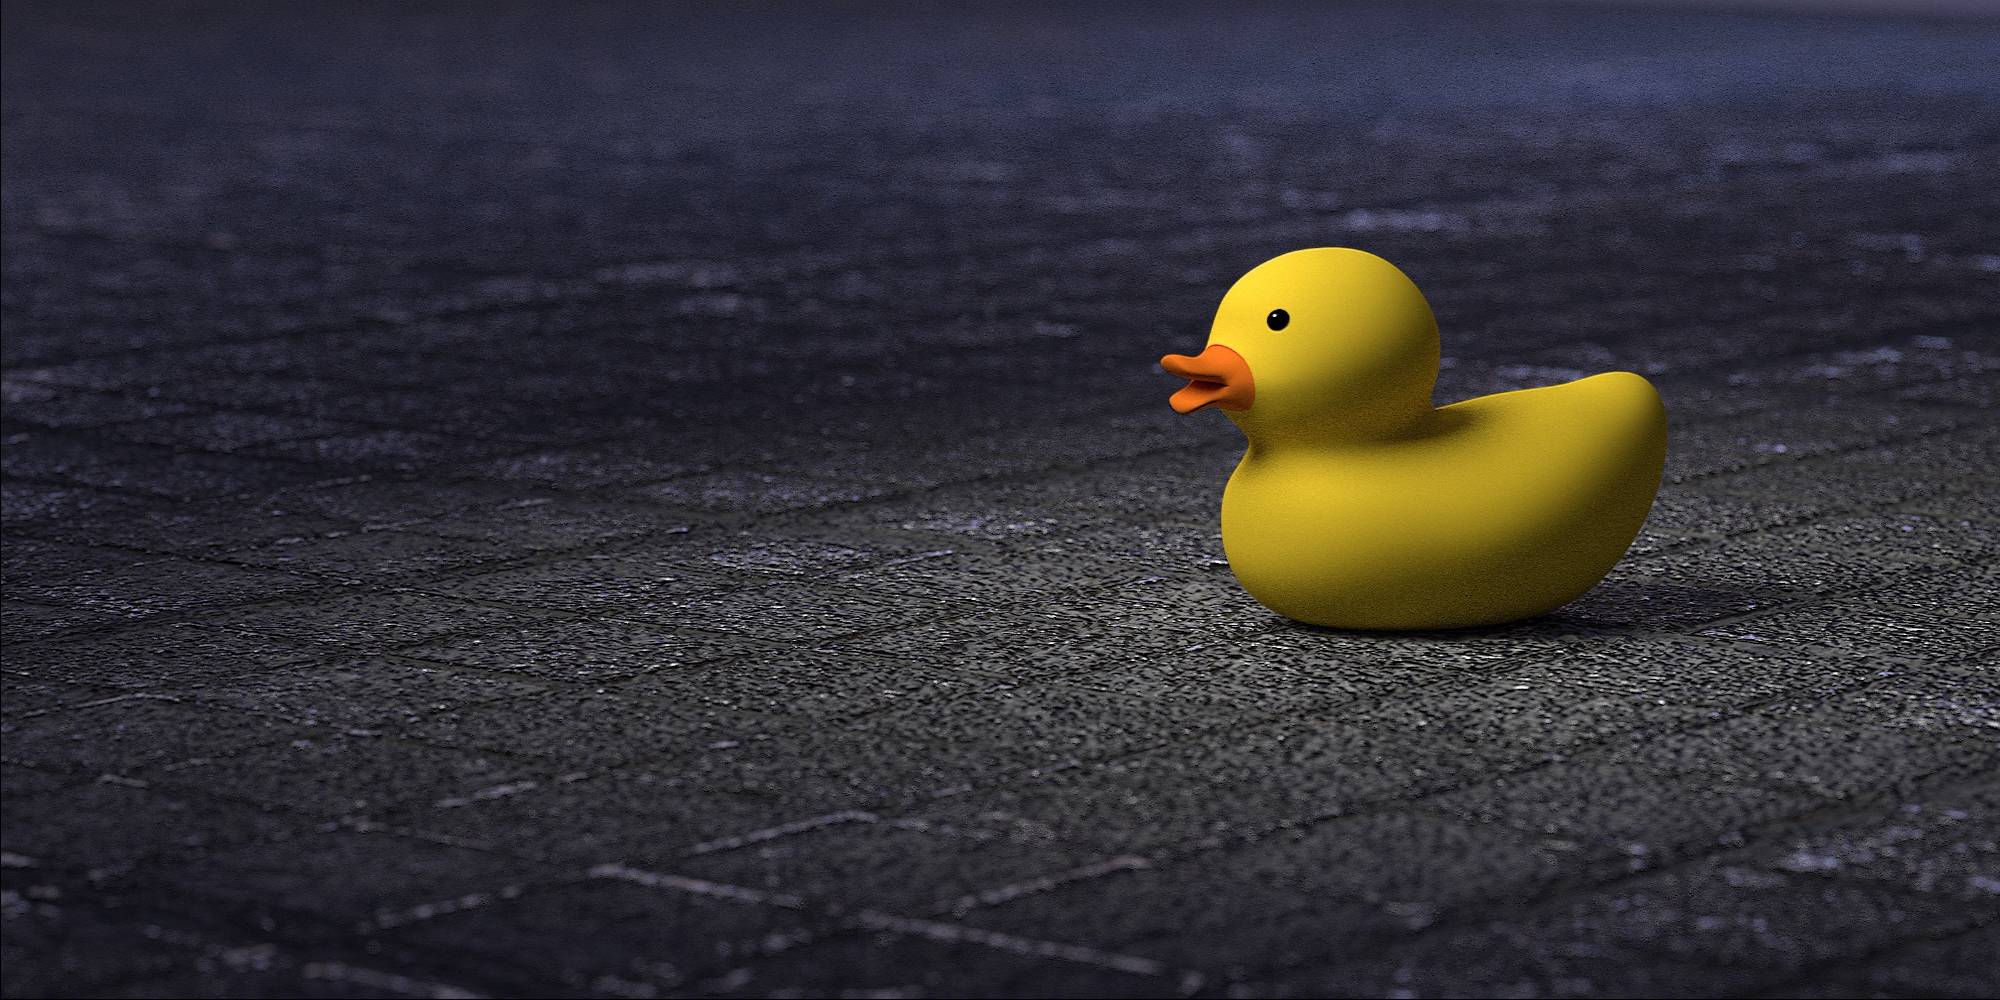 LonelyDuck